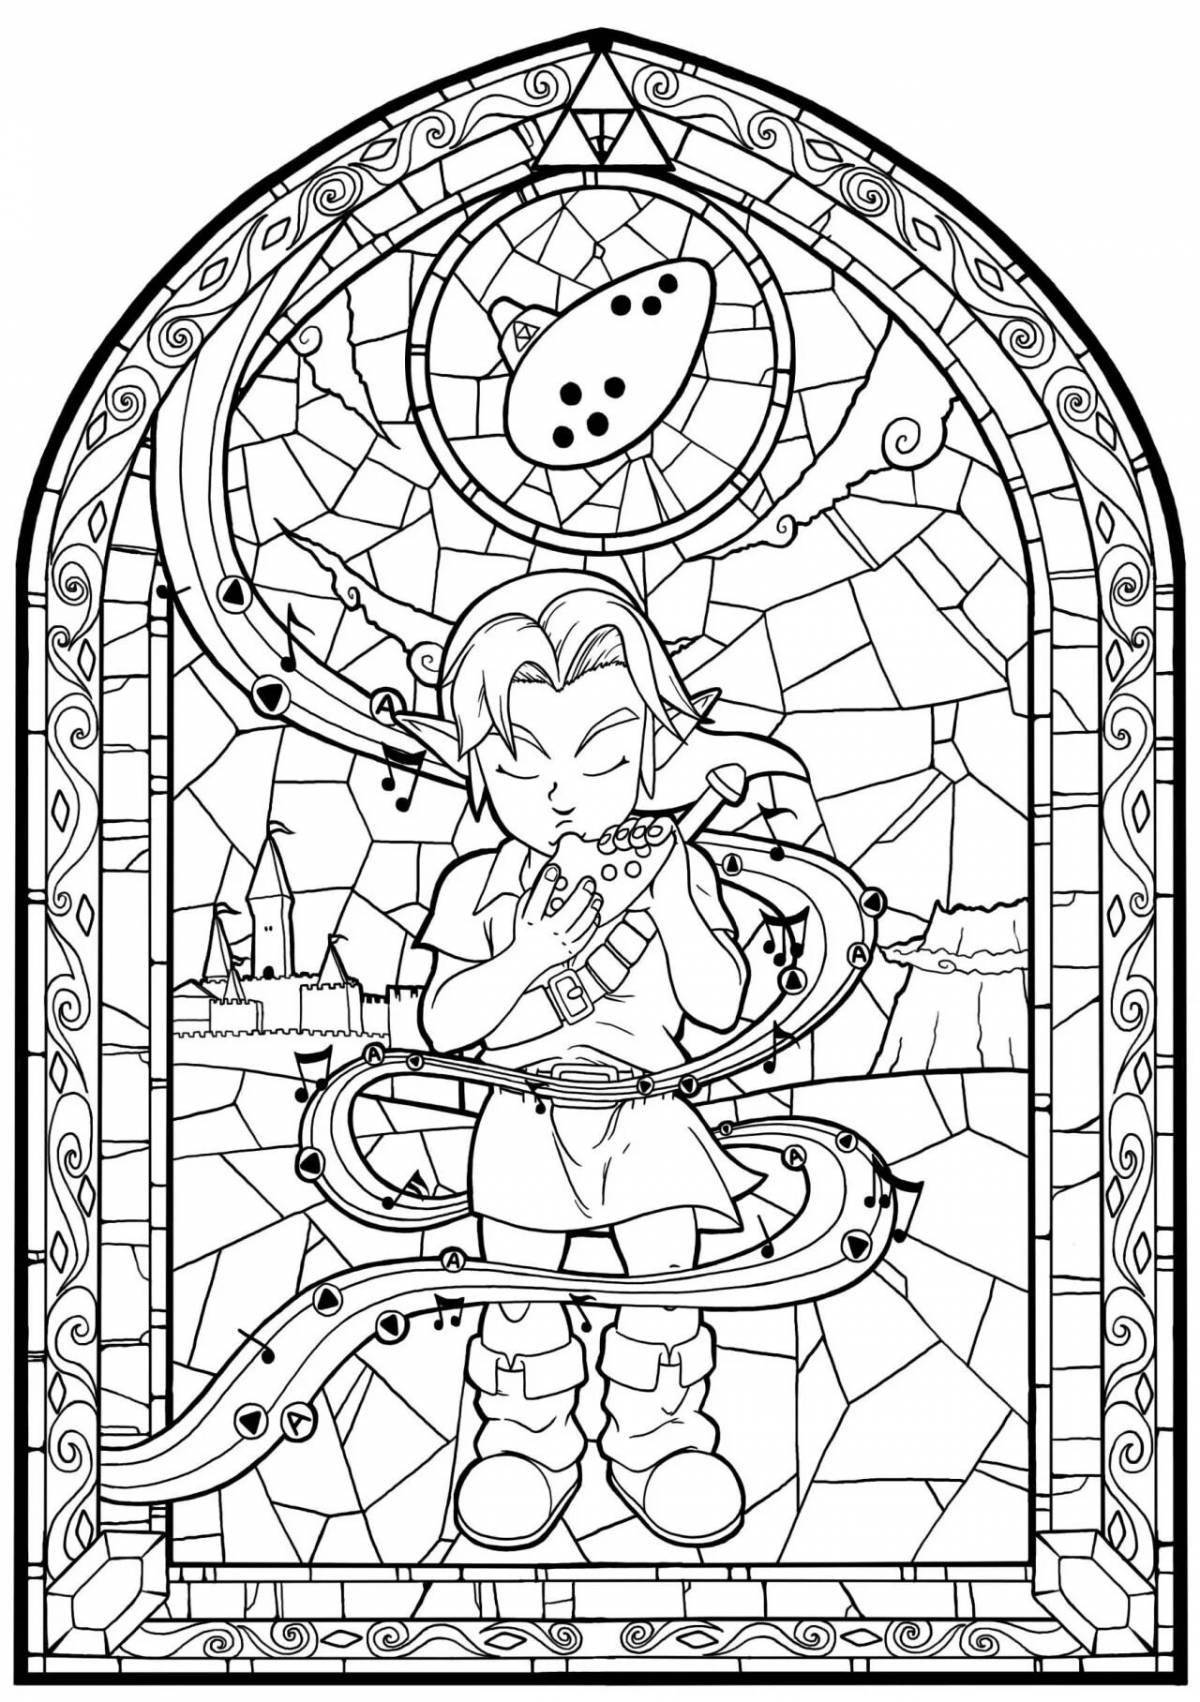 Great stained glass coloring page